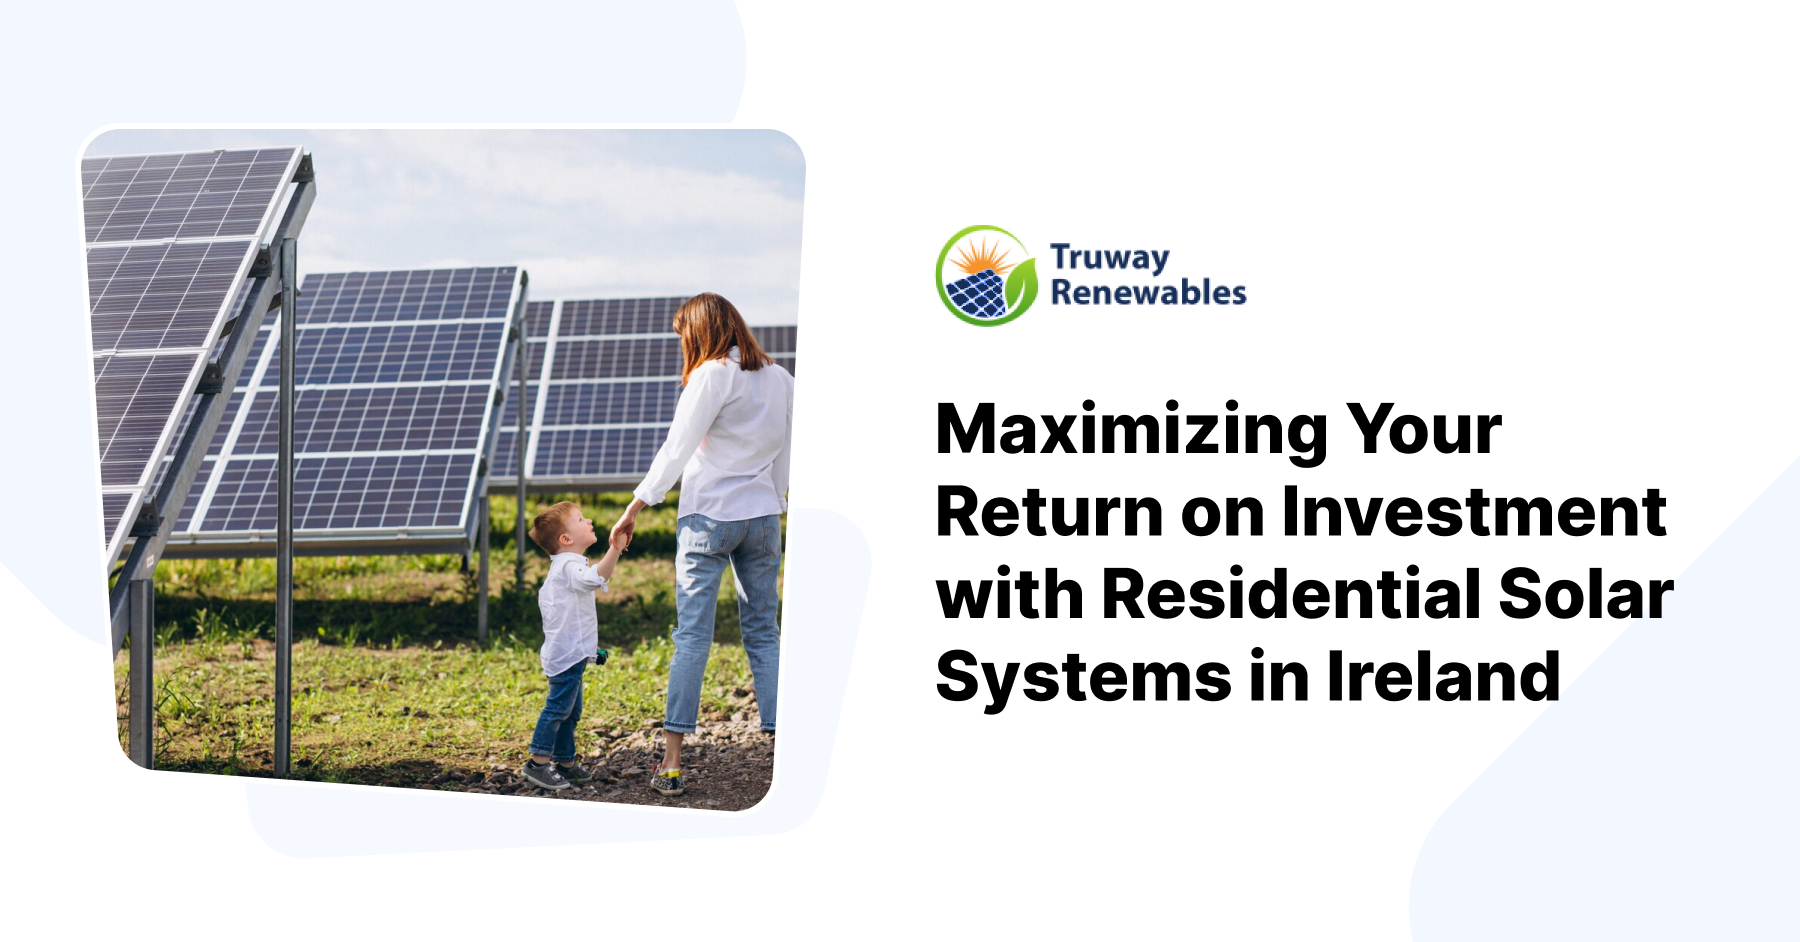 Maximizing Your Return on Investment with Residential Solar Systems in Ireland - Truway Renewables